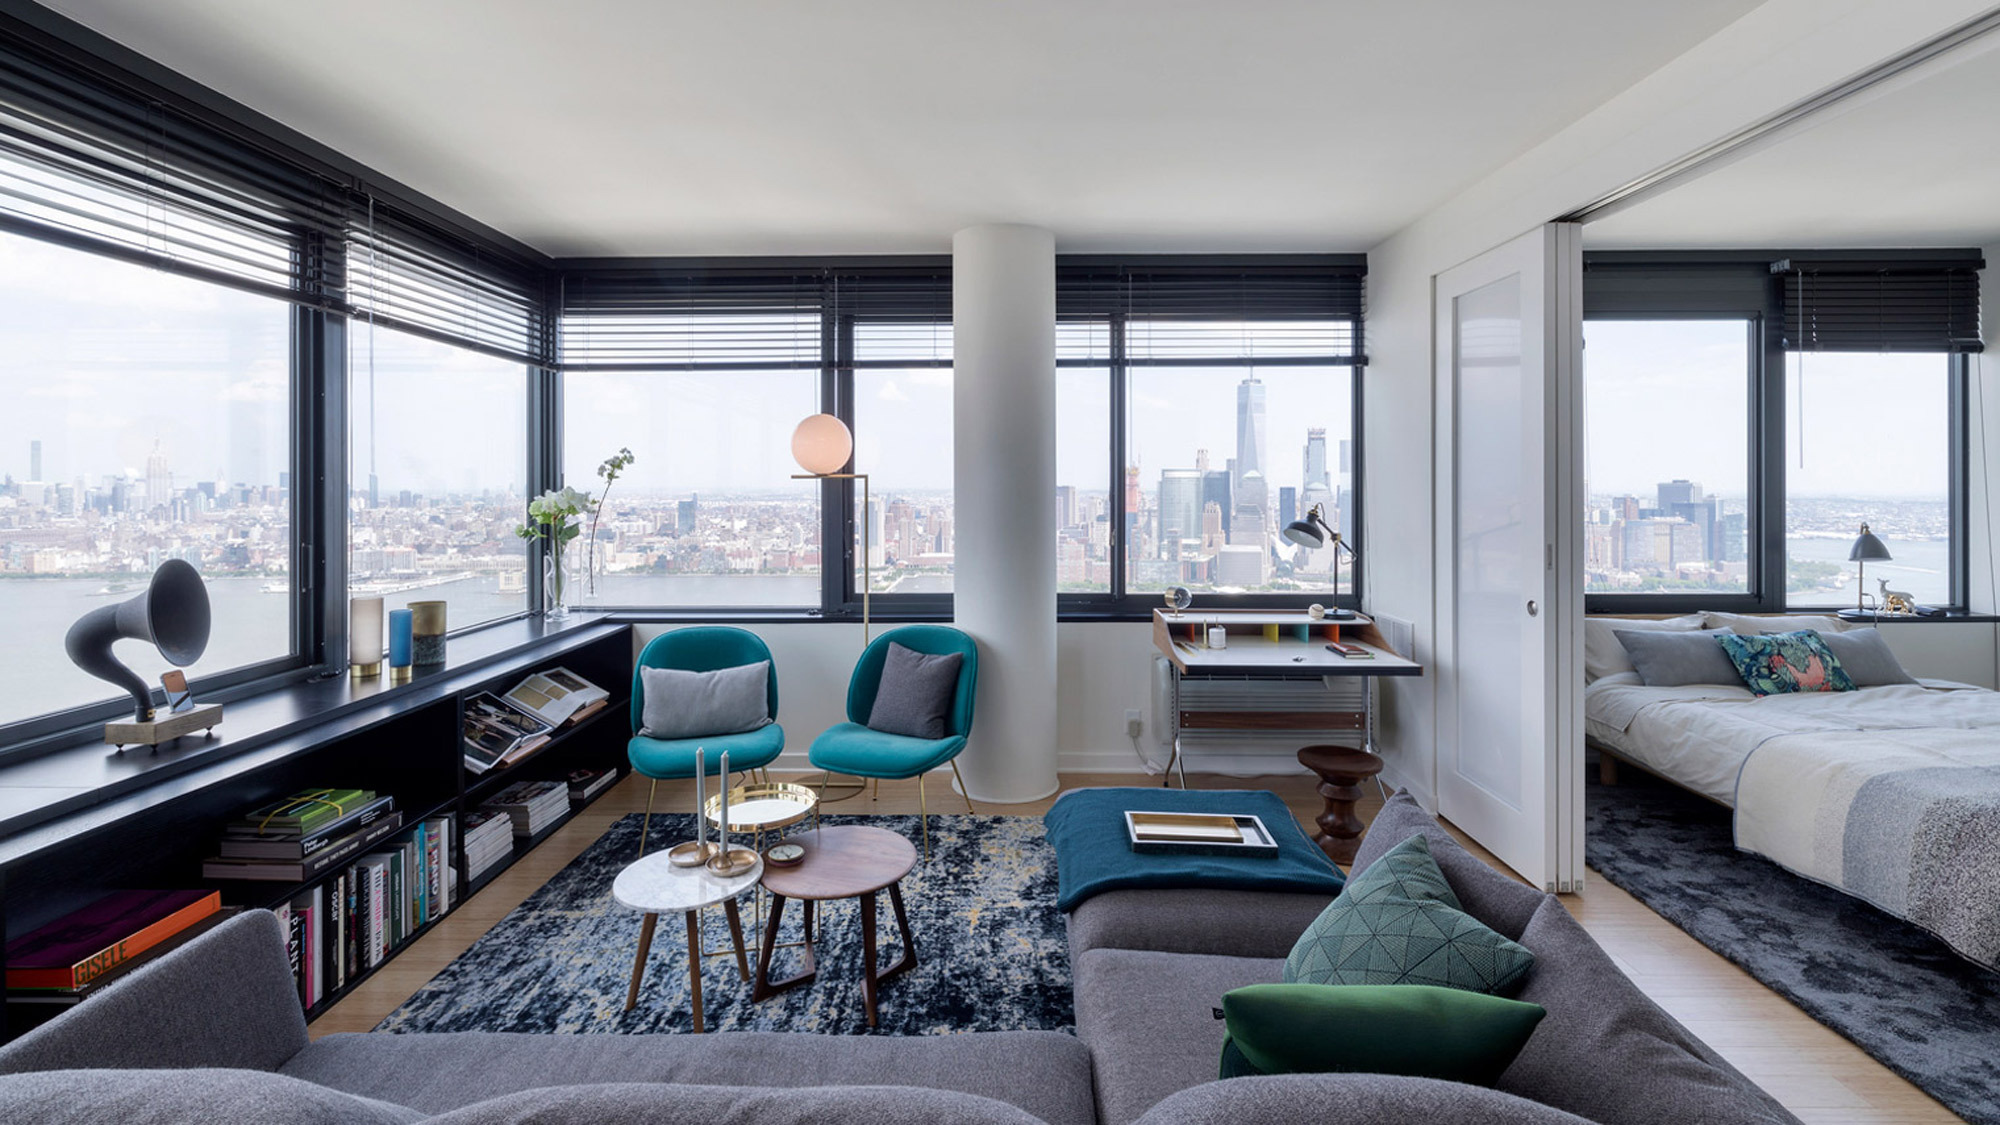 Open-plan living space with floor-to-ceiling windows offering a panoramic city view. Mid-century modern influences seen in teal armchairs and geometric coffee tables. Neutral tones balance the vibrant furniture, and strategic lighting enhances the room's sleek, urban ambiance.